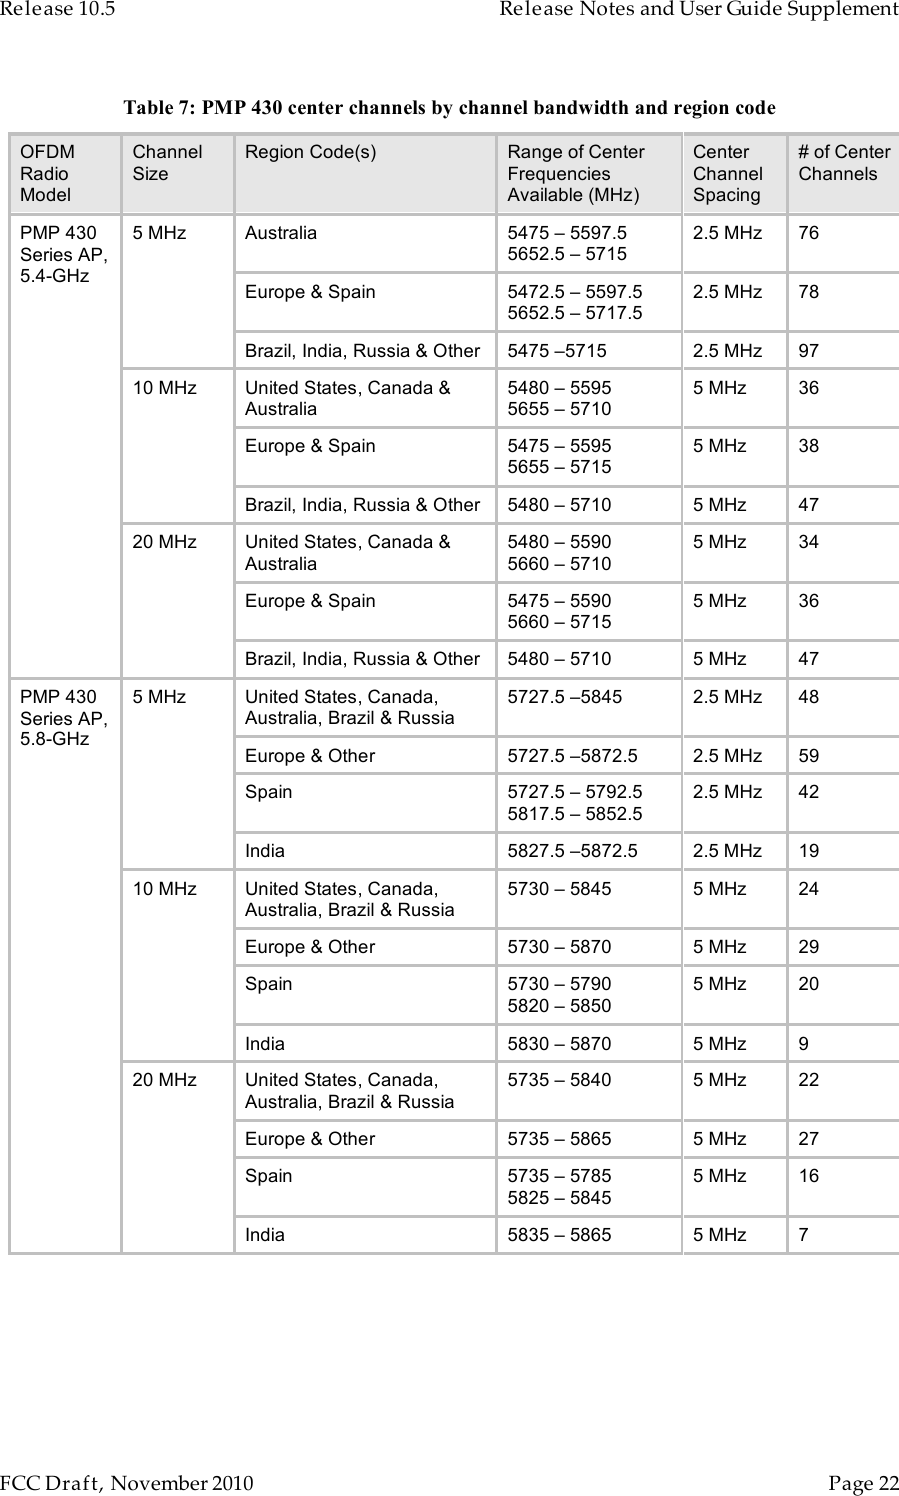 Release 10.5    Release Notes and User Guide Supplement      FCC Draft, November 2010  Page 22   Table 7: PMP 430 center channels by channel bandwidth and region code OFDM Radio Model Channel Size Region Code(s) Range of Center Frequencies Available (MHz) Center Channel Spacing # of Center Channels Australia 5475 – 5597.5 5652.5 – 5715 2.5 MHz 76 Europe &amp; Spain 5472.5 – 5597.5           5652.5 – 5717.5 2.5 MHz 78 5 MHz Brazil, India, Russia &amp; Other 5475 –5715 2.5 MHz 97 United States, Canada &amp; Australia 5480 – 5595 5655 – 5710 5 MHz 36 Europe &amp; Spain 5475 – 5595 5655 – 5715 5 MHz 38 10 MHz Brazil, India, Russia &amp; Other 5480 – 5710 5 MHz 47 United States, Canada &amp; Australia 5480 – 5590 5660 – 5710 5 MHz 34 Europe &amp; Spain 5475 – 5590 5660 – 5715 5 MHz 36 PMP 430 Series AP, 5.4-GHz 20 MHz Brazil, India, Russia &amp; Other 5480 – 5710 5 MHz 47 United States, Canada, Australia, Brazil &amp; Russia 5727.5 –5845 2.5 MHz 48 Europe &amp; Other 5727.5 –5872.5 2.5 MHz 59 Spain 5727.5 – 5792.5 5817.5 – 5852.5 2.5 MHz 42 5 MHz India 5827.5 –5872.5 2.5 MHz 19 United States, Canada, Australia, Brazil &amp; Russia 5730 – 5845 5 MHz 24 Europe &amp; Other 5730 – 5870 5 MHz 29 Spain 5730 – 5790 5820 – 5850 5 MHz 20 10 MHz India 5830 – 5870 5 MHz 9 United States, Canada, Australia, Brazil &amp; Russia 5735 – 5840 5 MHz 22 Europe &amp; Other 5735 – 5865 5 MHz 27 Spain 5735 – 5785 5825 – 5845  5 MHz 16 PMP 430 Series AP, 5.8-GHz 20 MHz India 5835 – 5865 5 MHz 7   